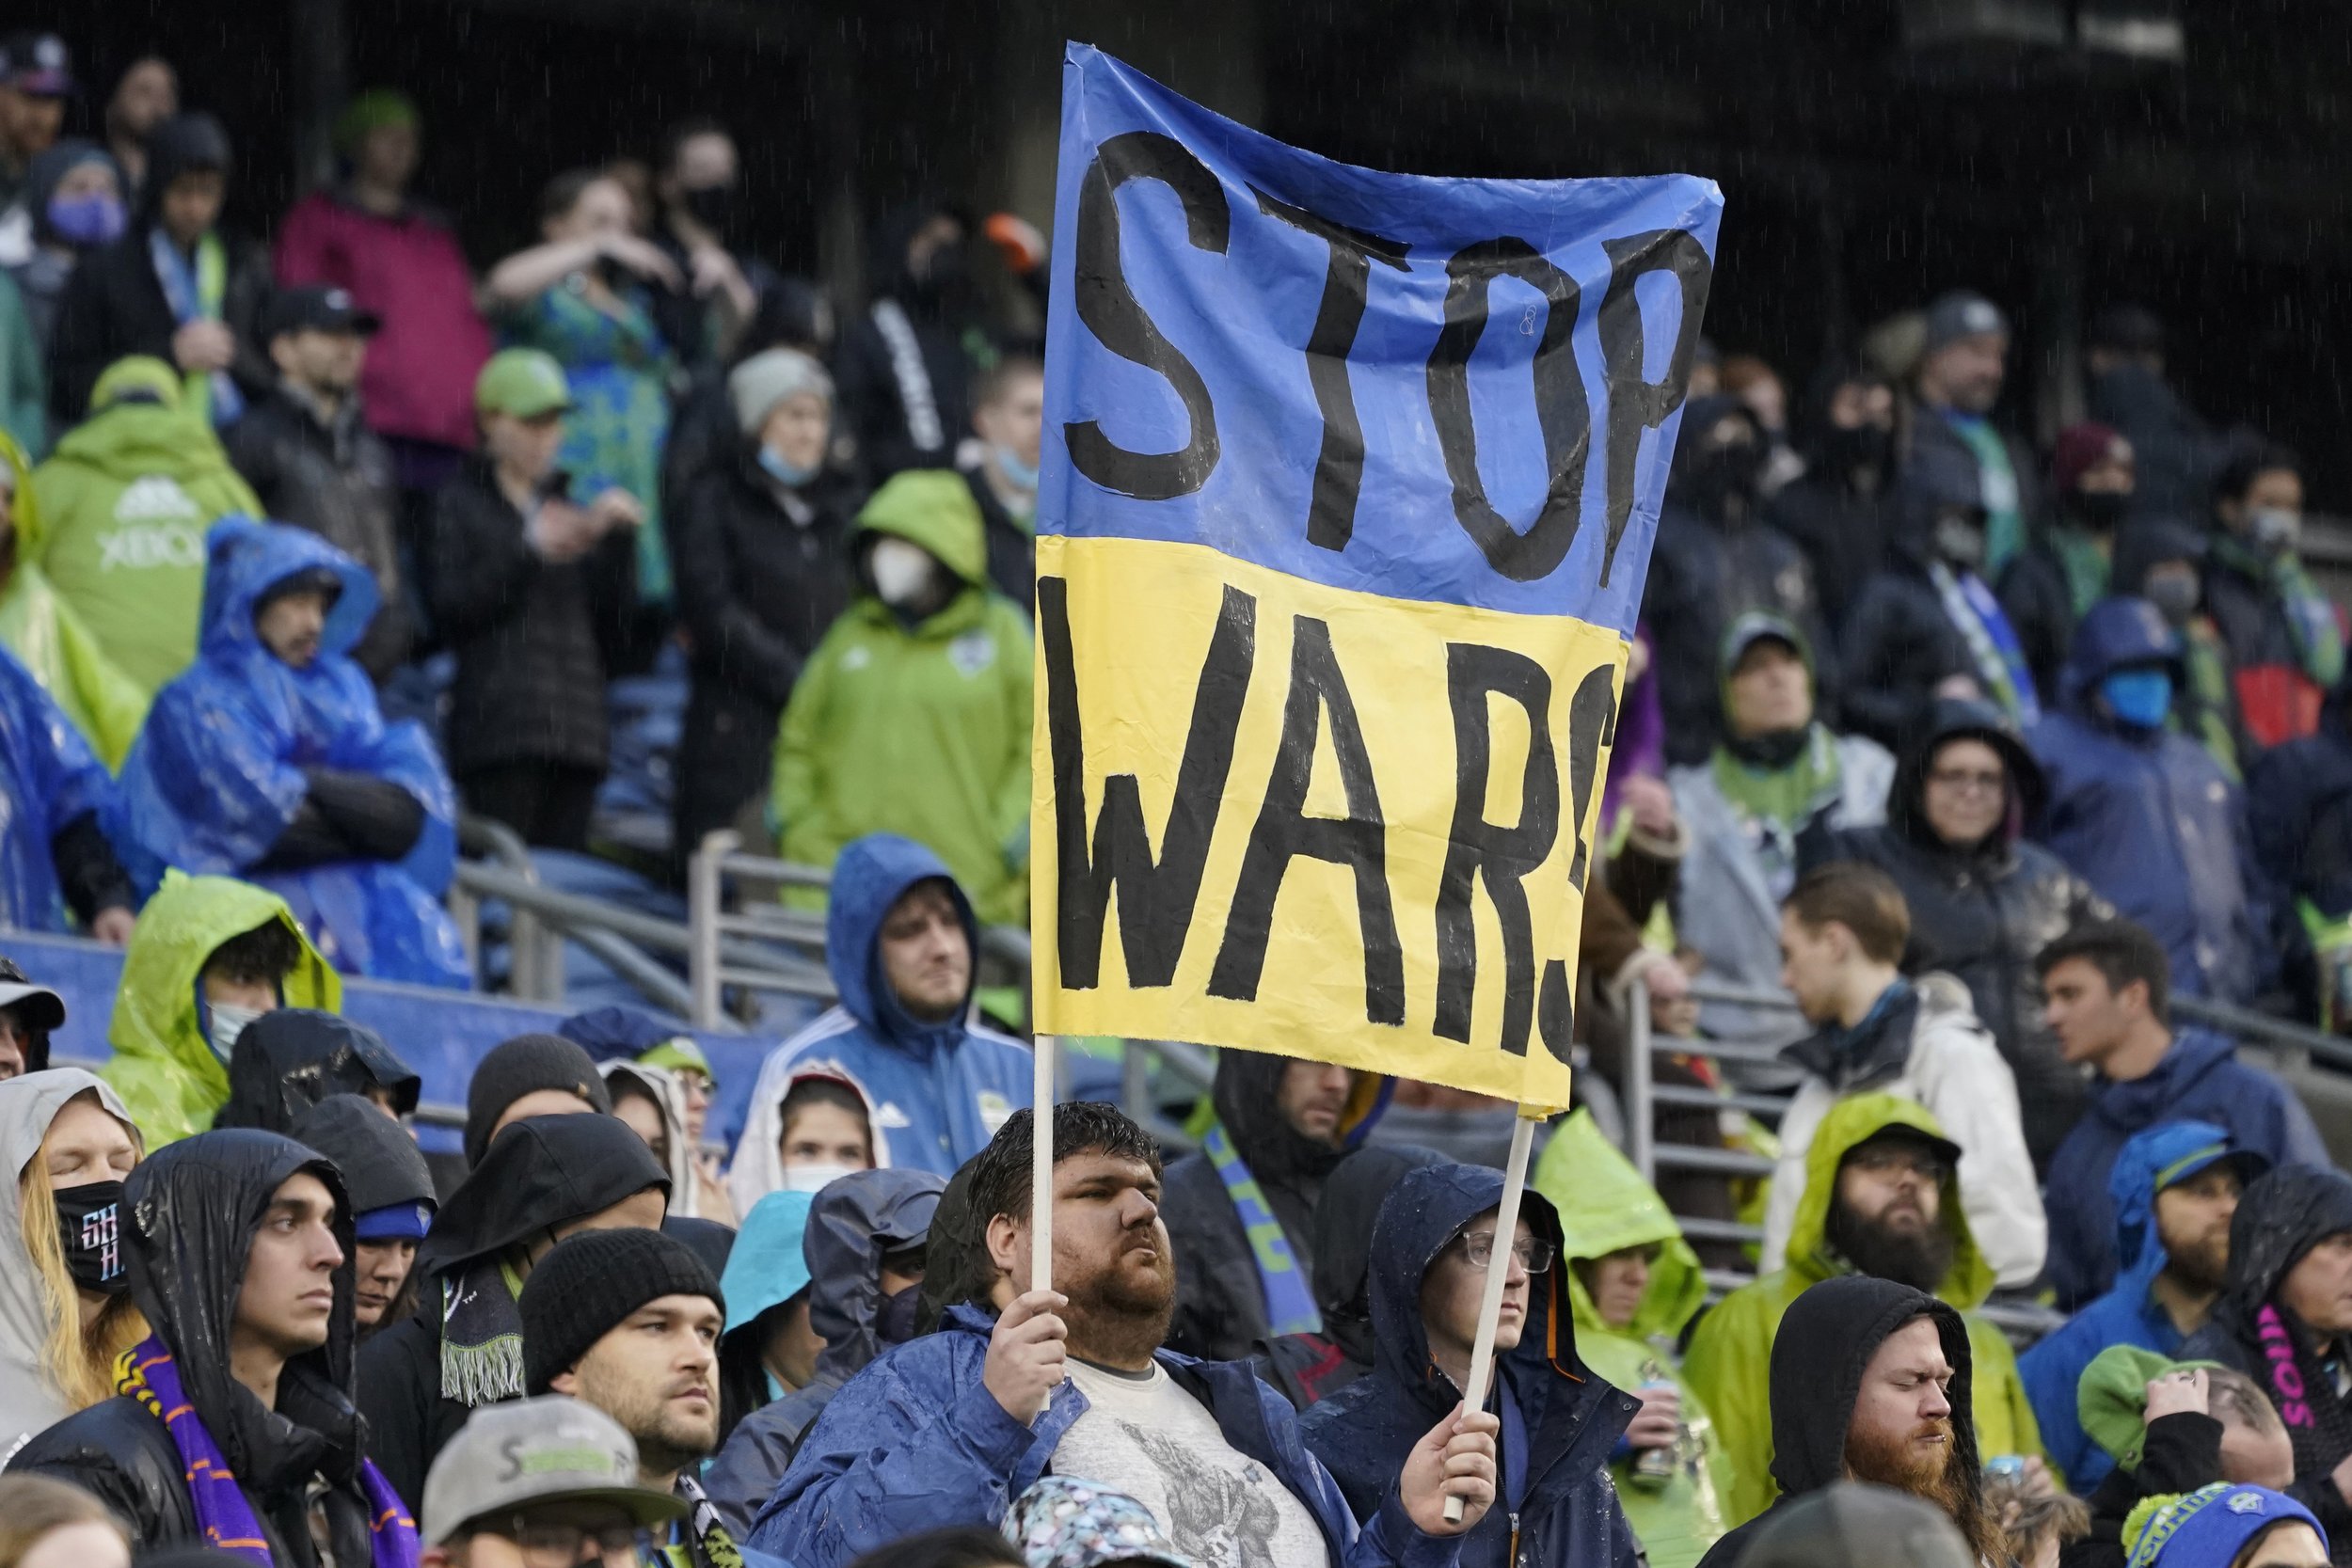  A Seattle Sounders supporter holds a sign that reads "Stop Wars" during a moment of silence for victims of the war in Ukraine, before the start of an MLS soccer match between the Sounders and Nashville SC, Sunday, Feb. 27, 2022, in Seattle. (AP Phot